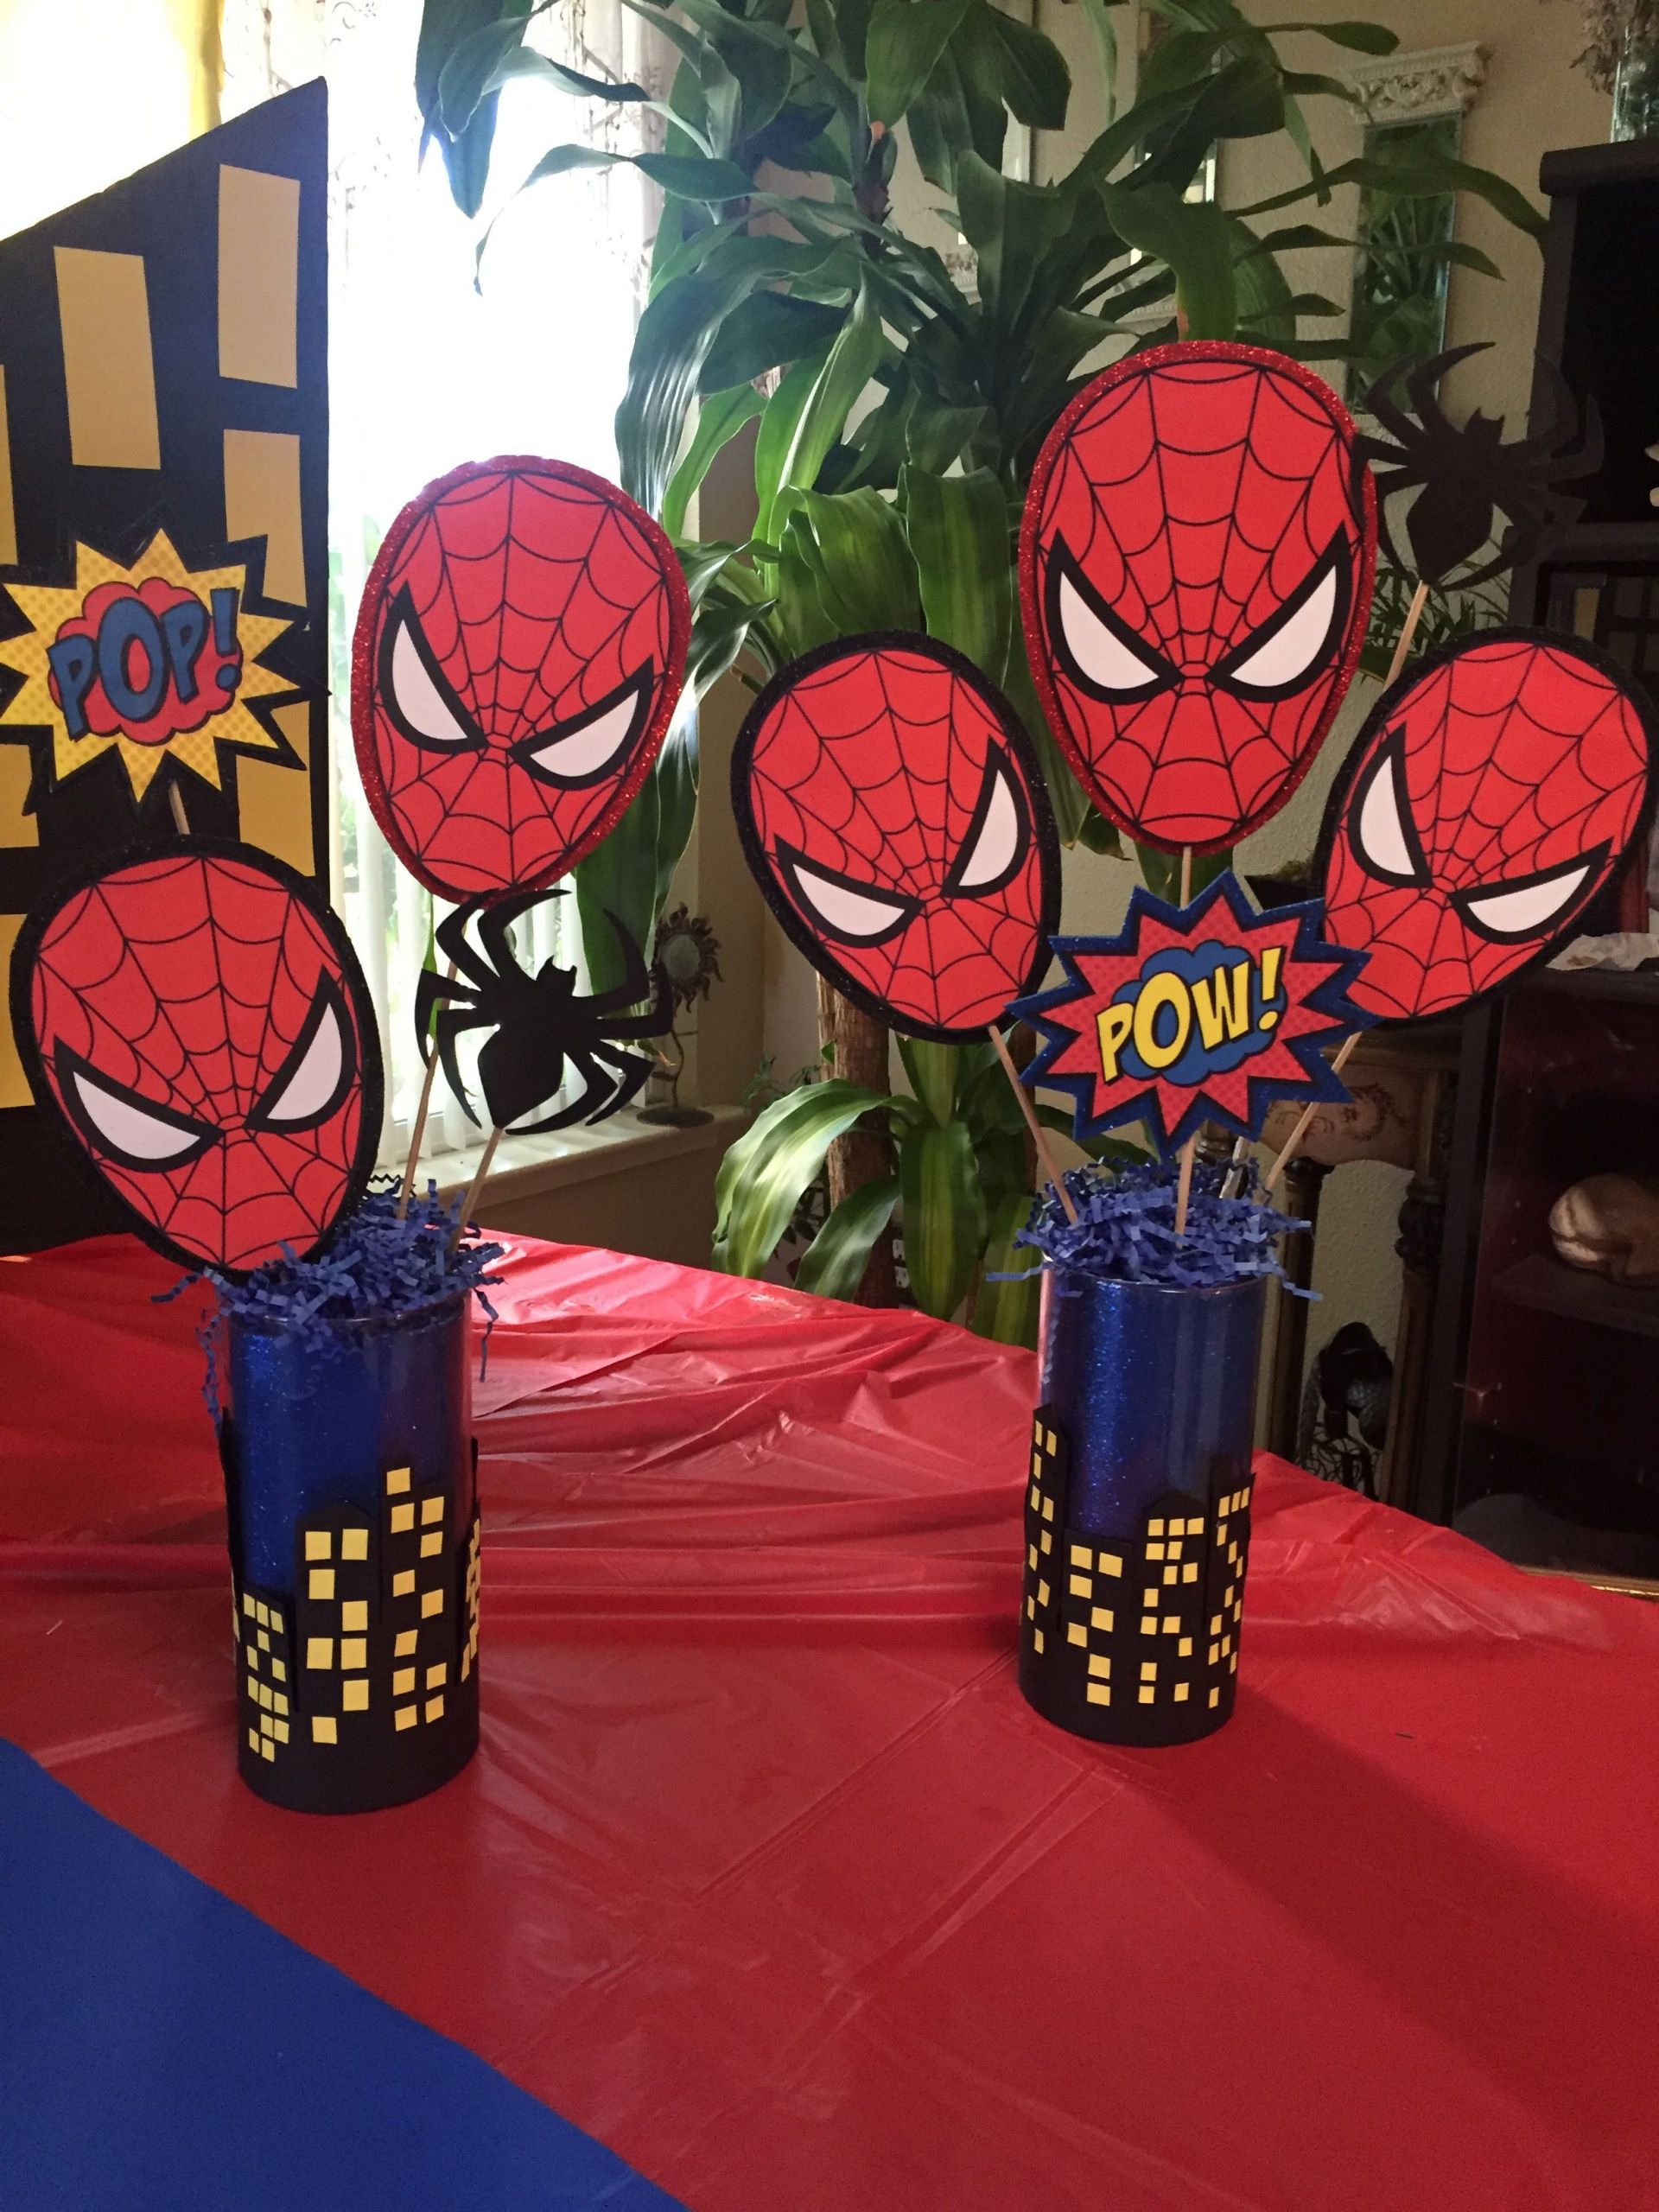 Spiderman Birthday Party Decorations
 Spider Man Theme Party Table Centerpieces by Christina L